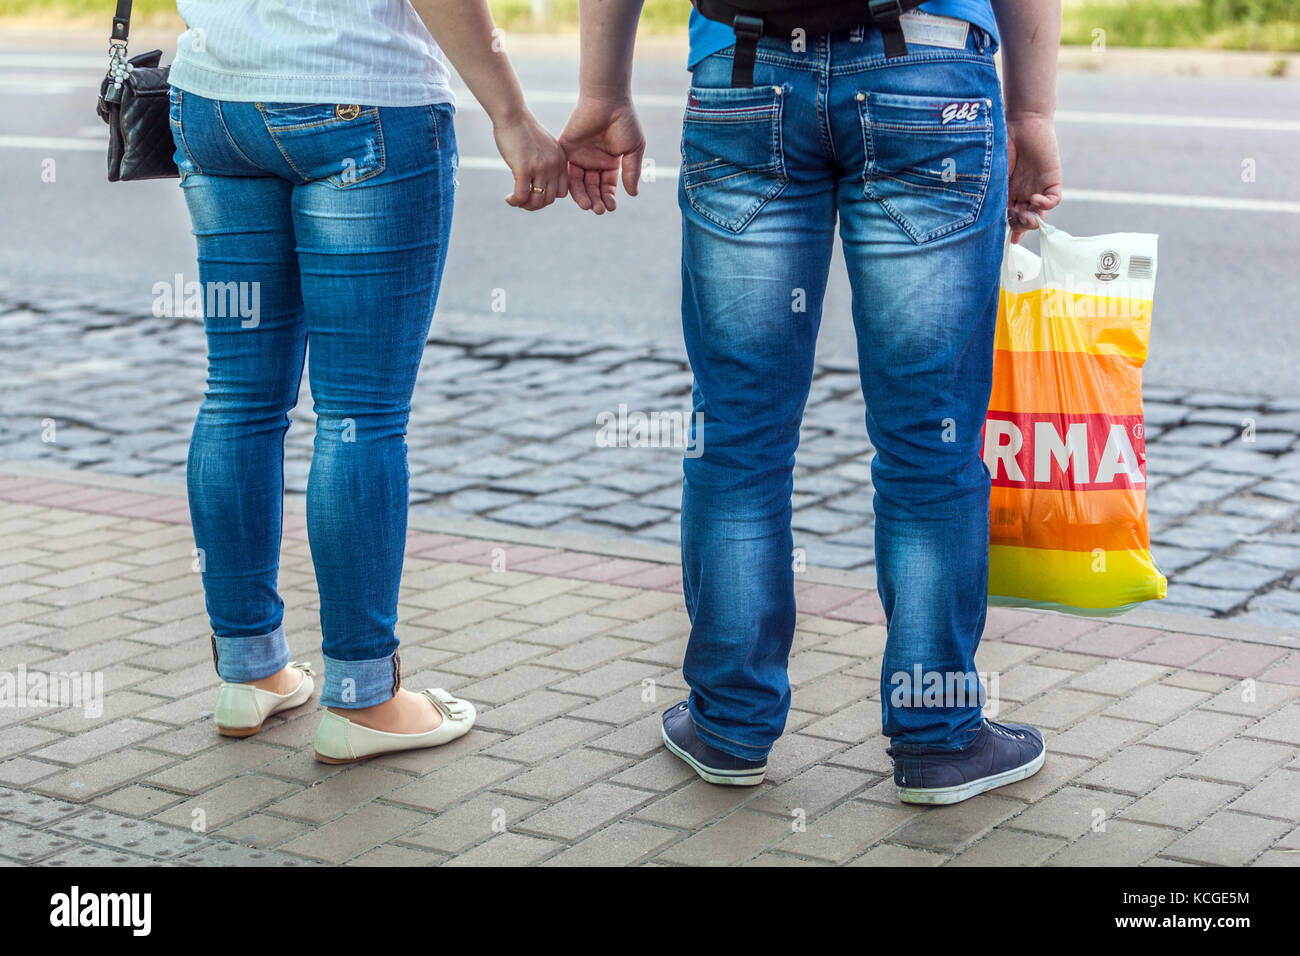 The people holding hands couple rear view, a man holding a plastic bag, Jeans street style Woman Man jeans Stock Photo